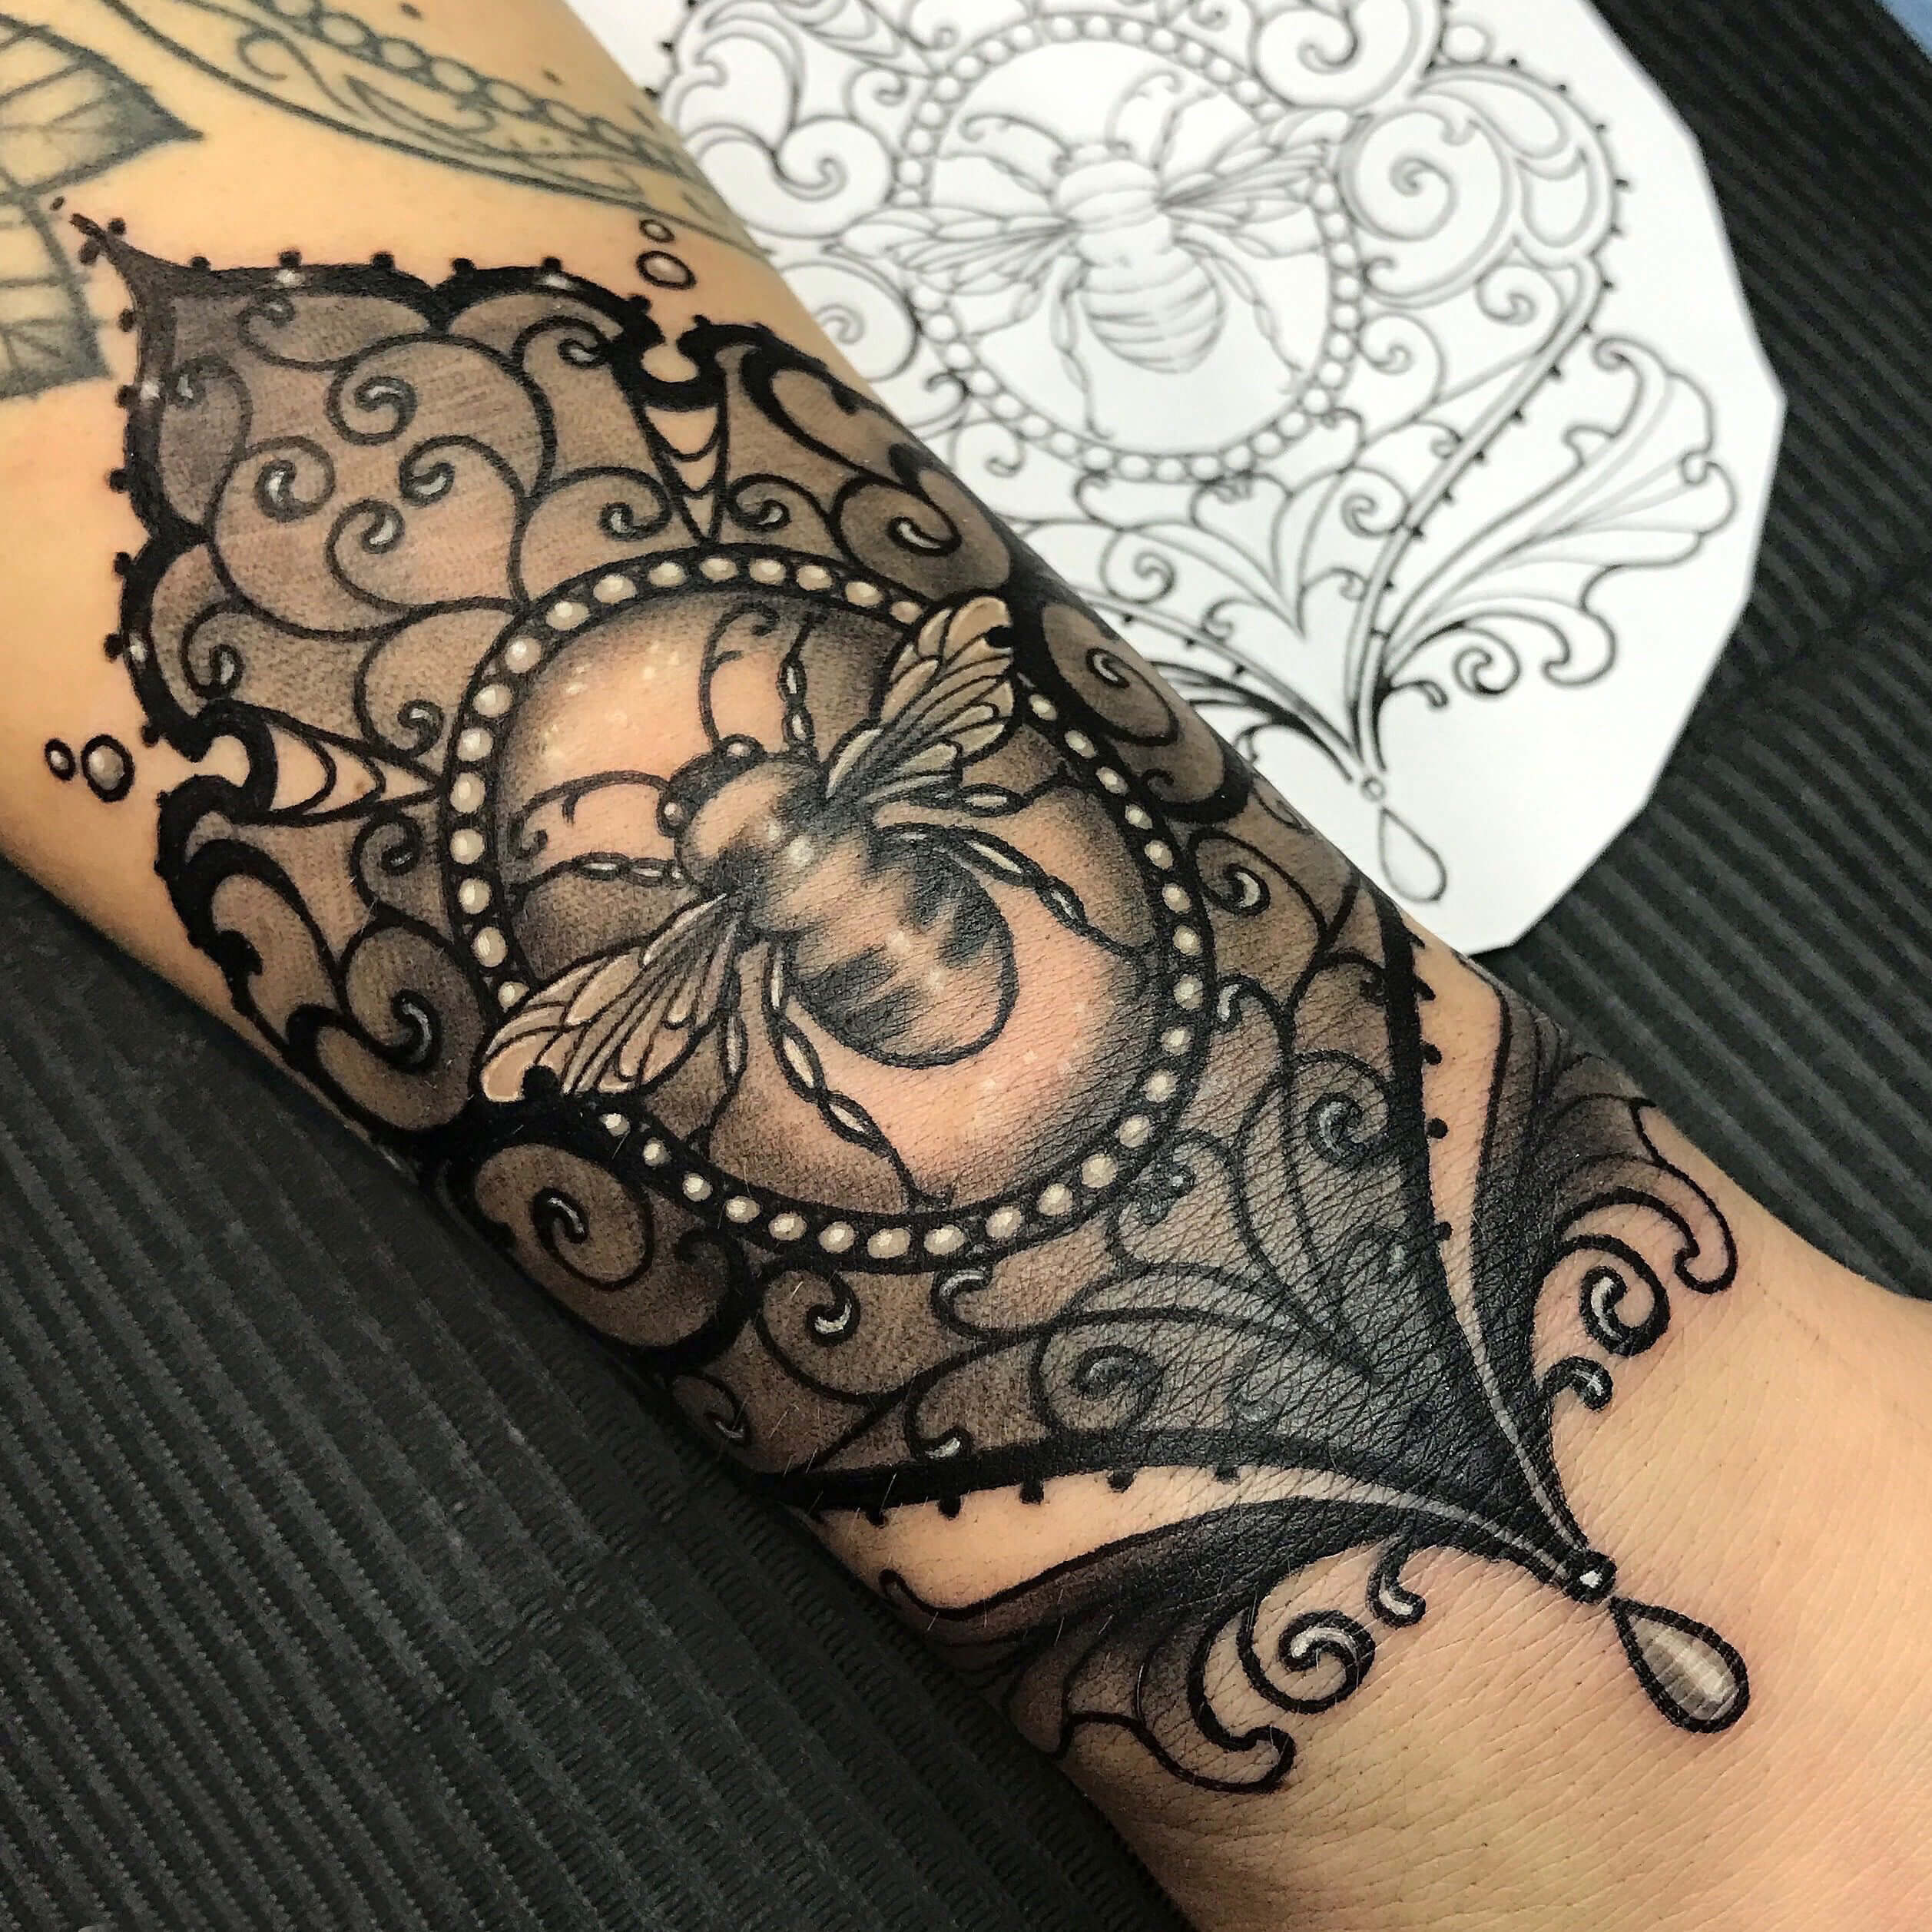 vintage lace lace tattoo designs 15 105 Beautiful Vintage Lace Lace Tattoo Designs For The Fashionable Woman